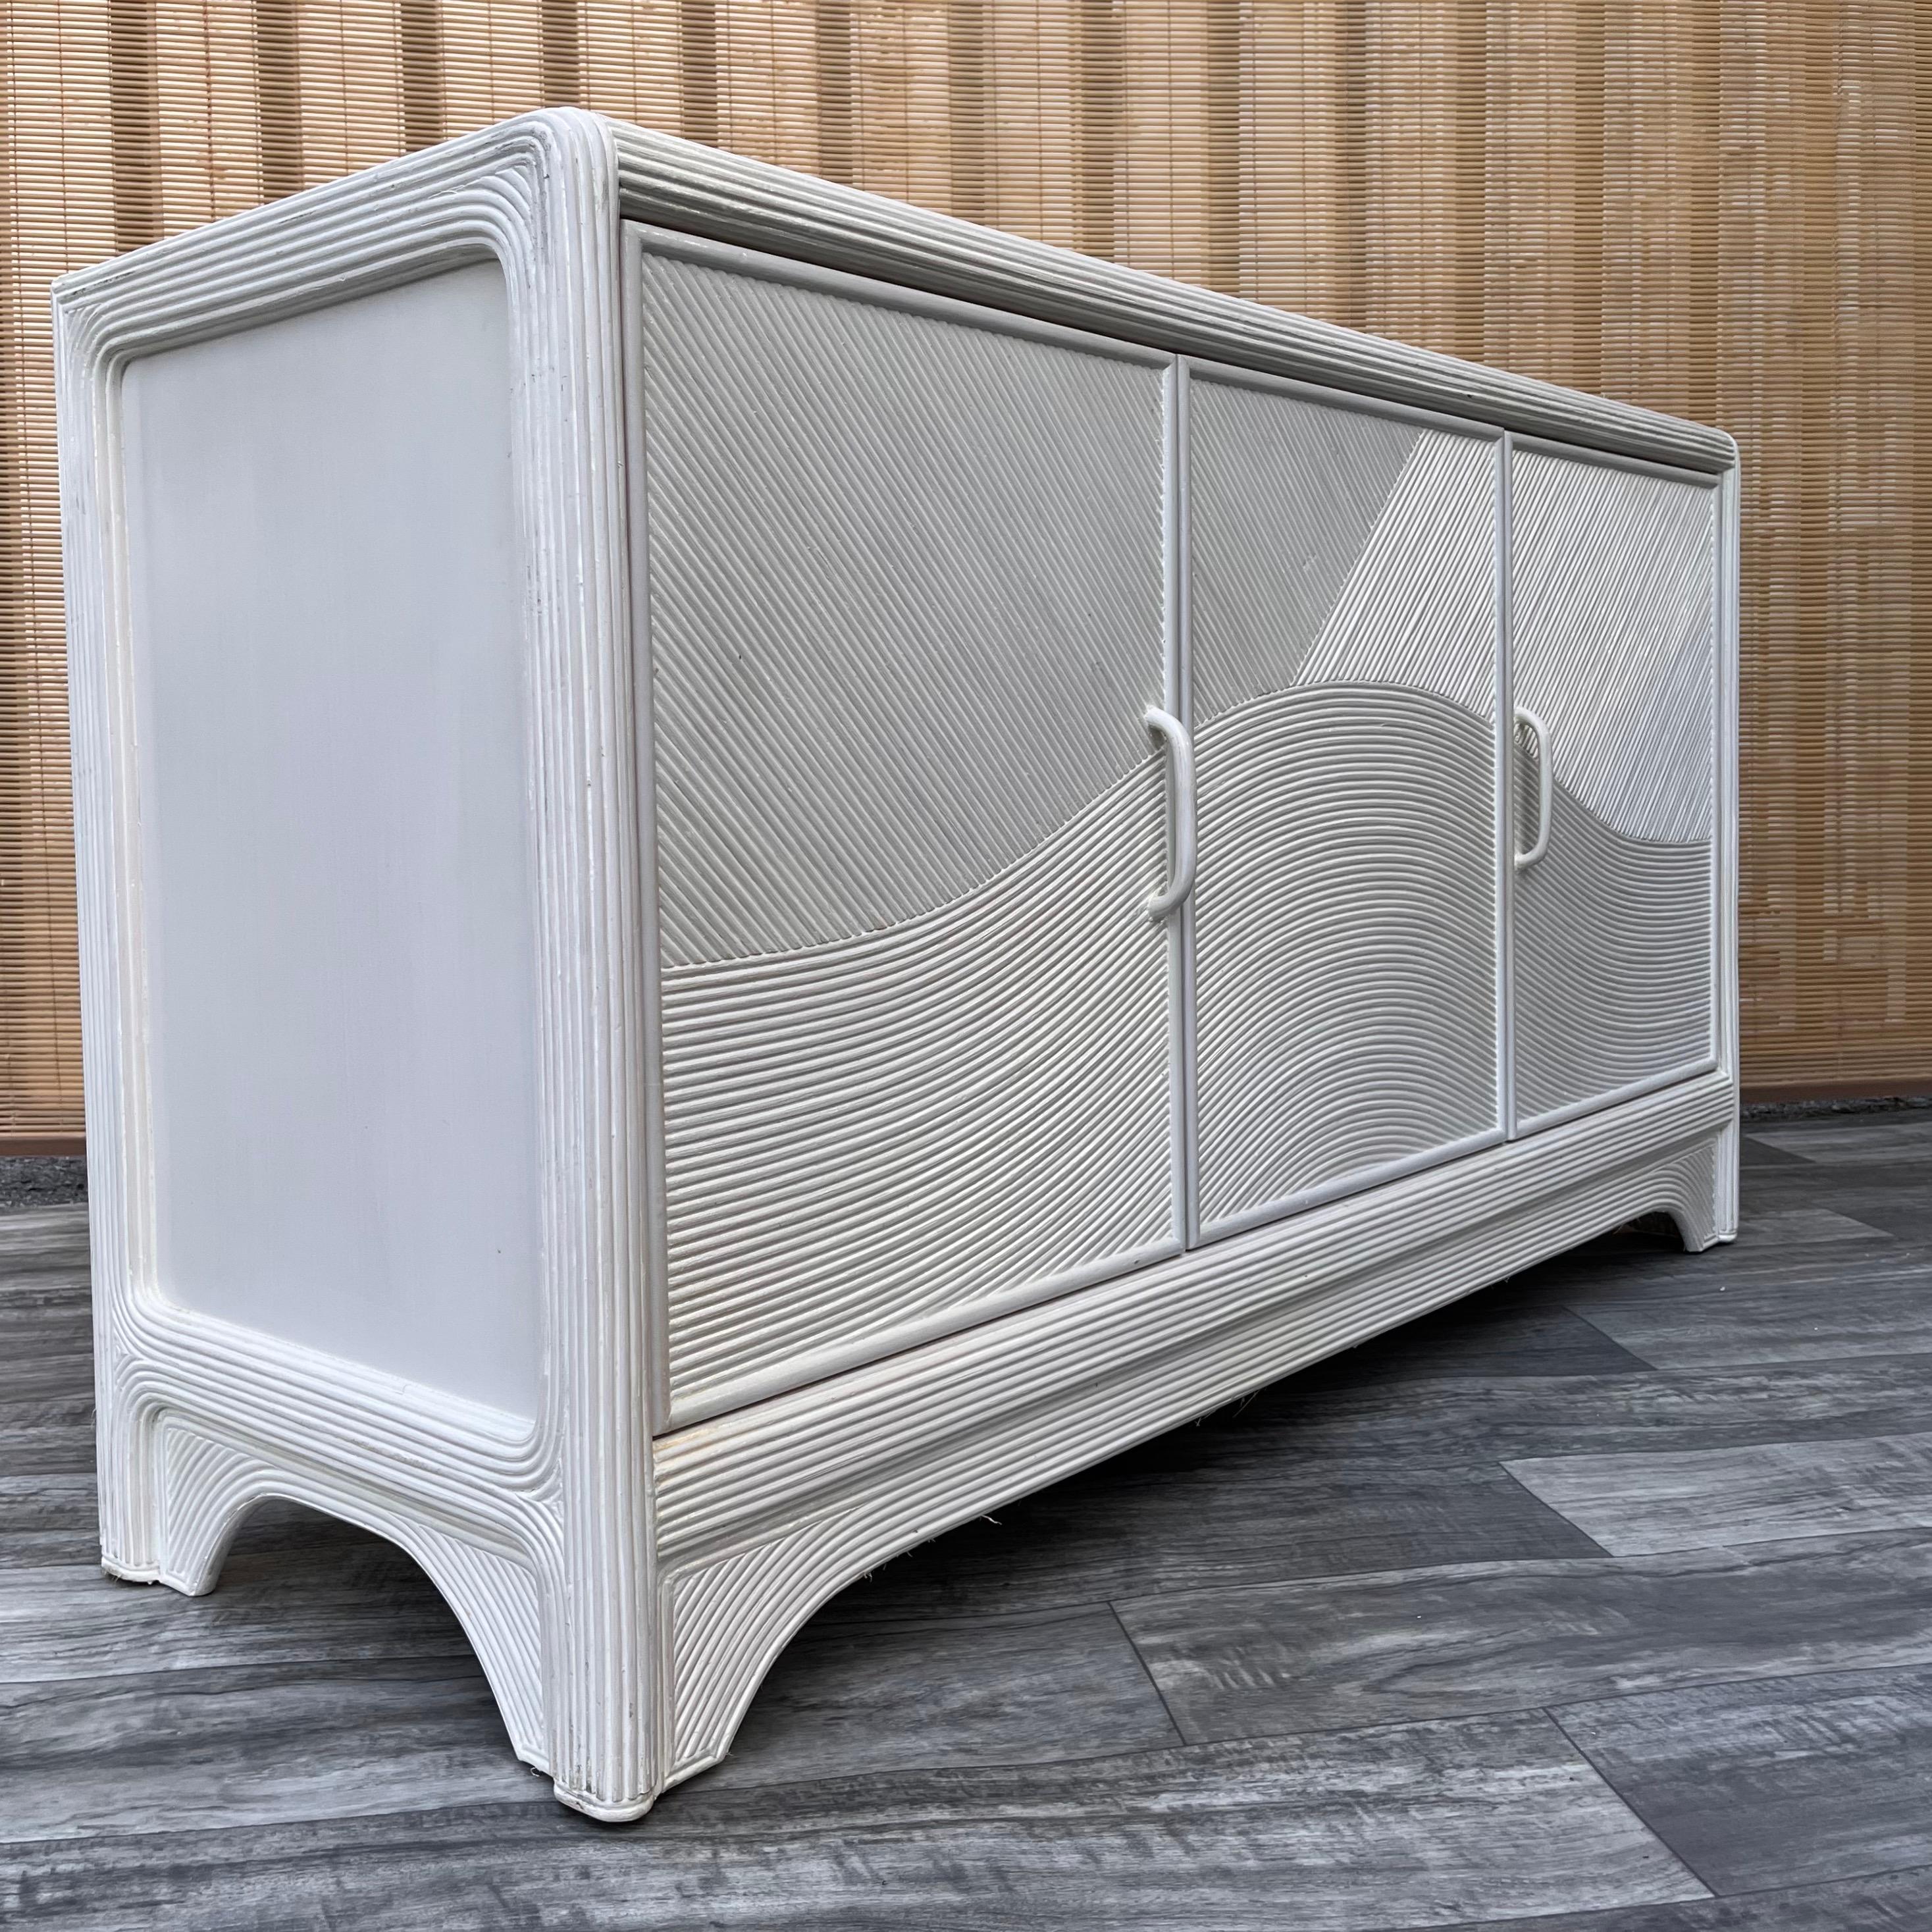 Late 20th Century Coastal Style Pencil Reed Sideboard/ Credenza in the Gabriella Crespi Manner